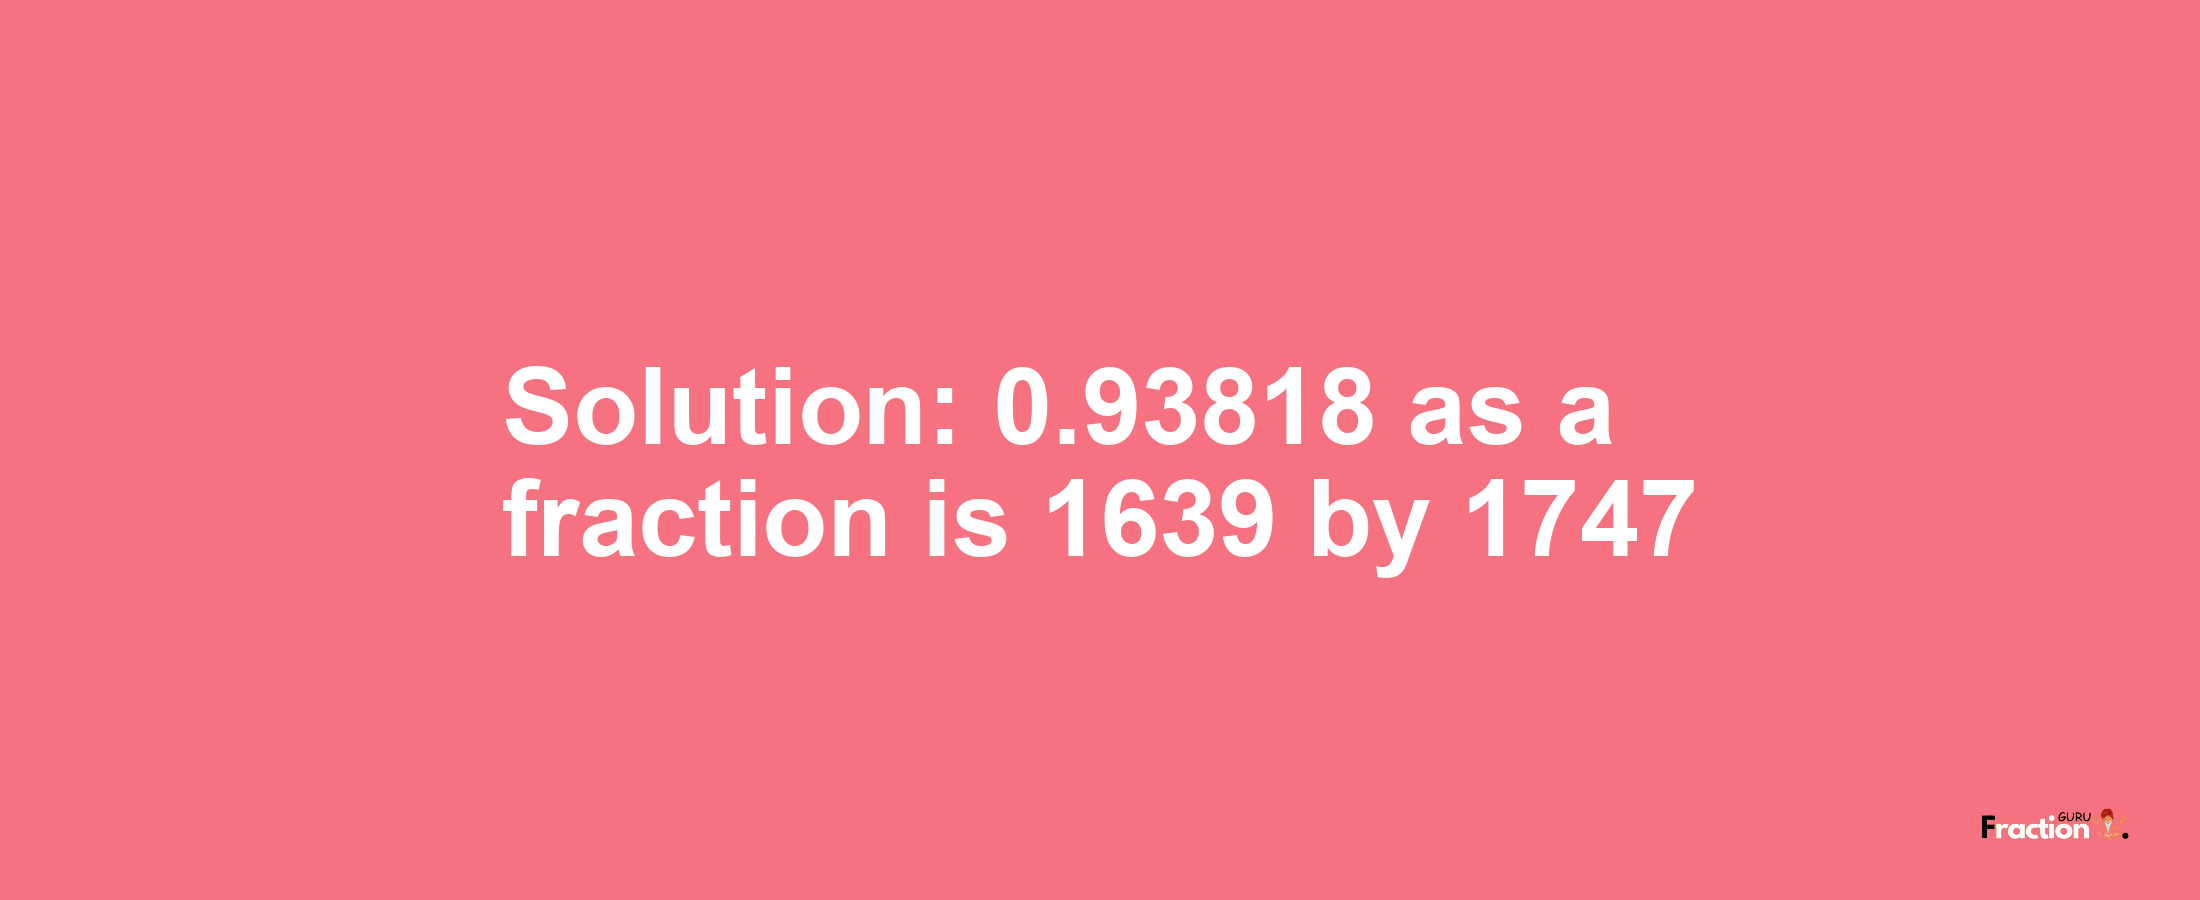 Solution:0.93818 as a fraction is 1639/1747